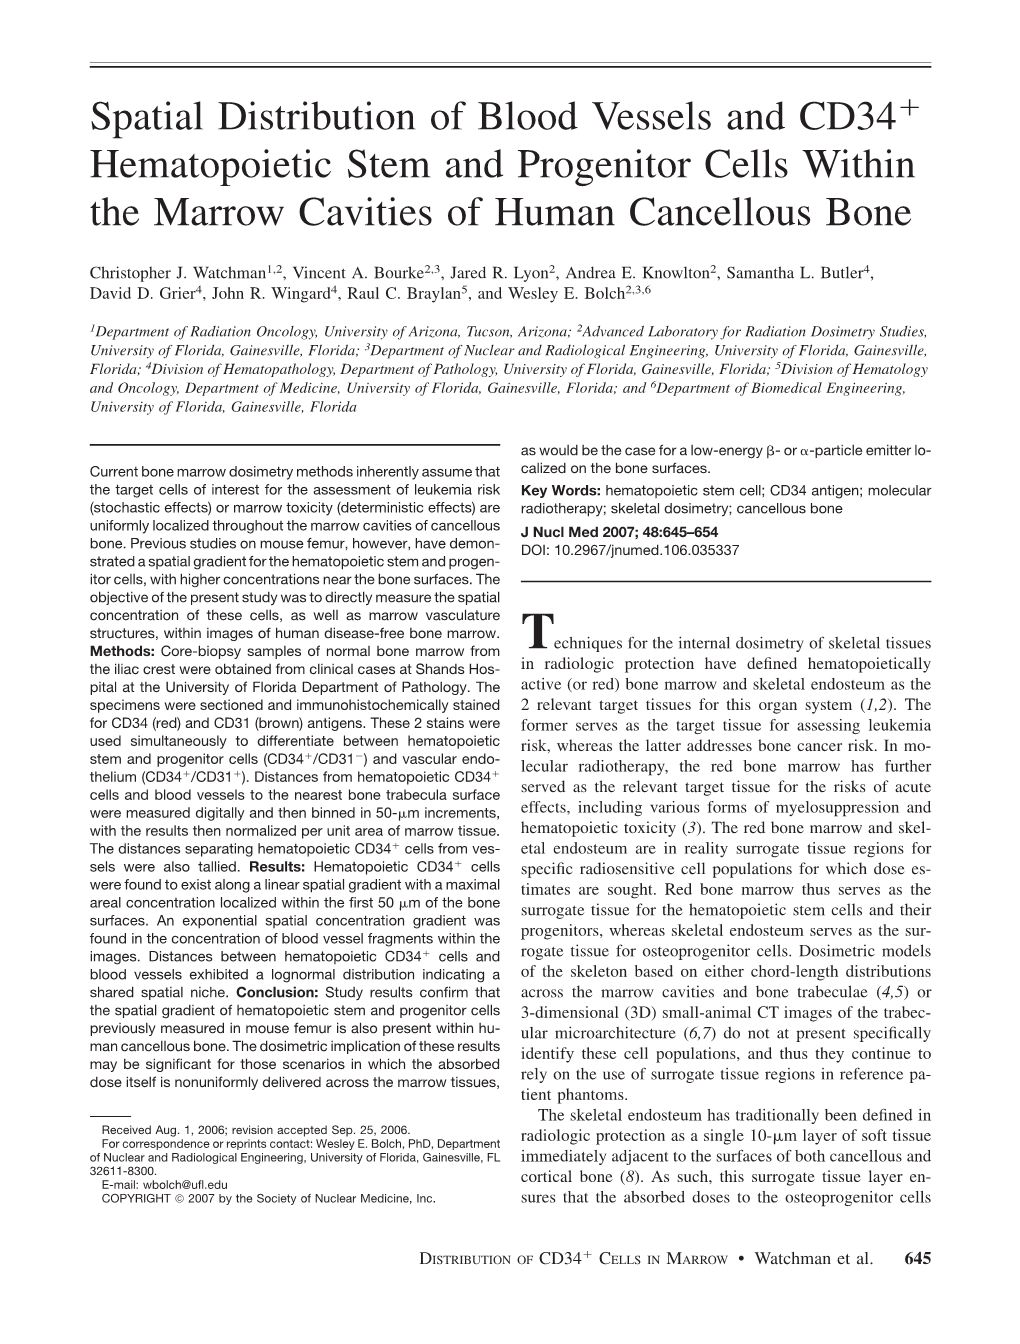 Spatial Distribution of Blood Vessels and CD341 Hematopoietic Stem and Progenitor Cells Within the Marrow Cavities of Human Cancellous Bone